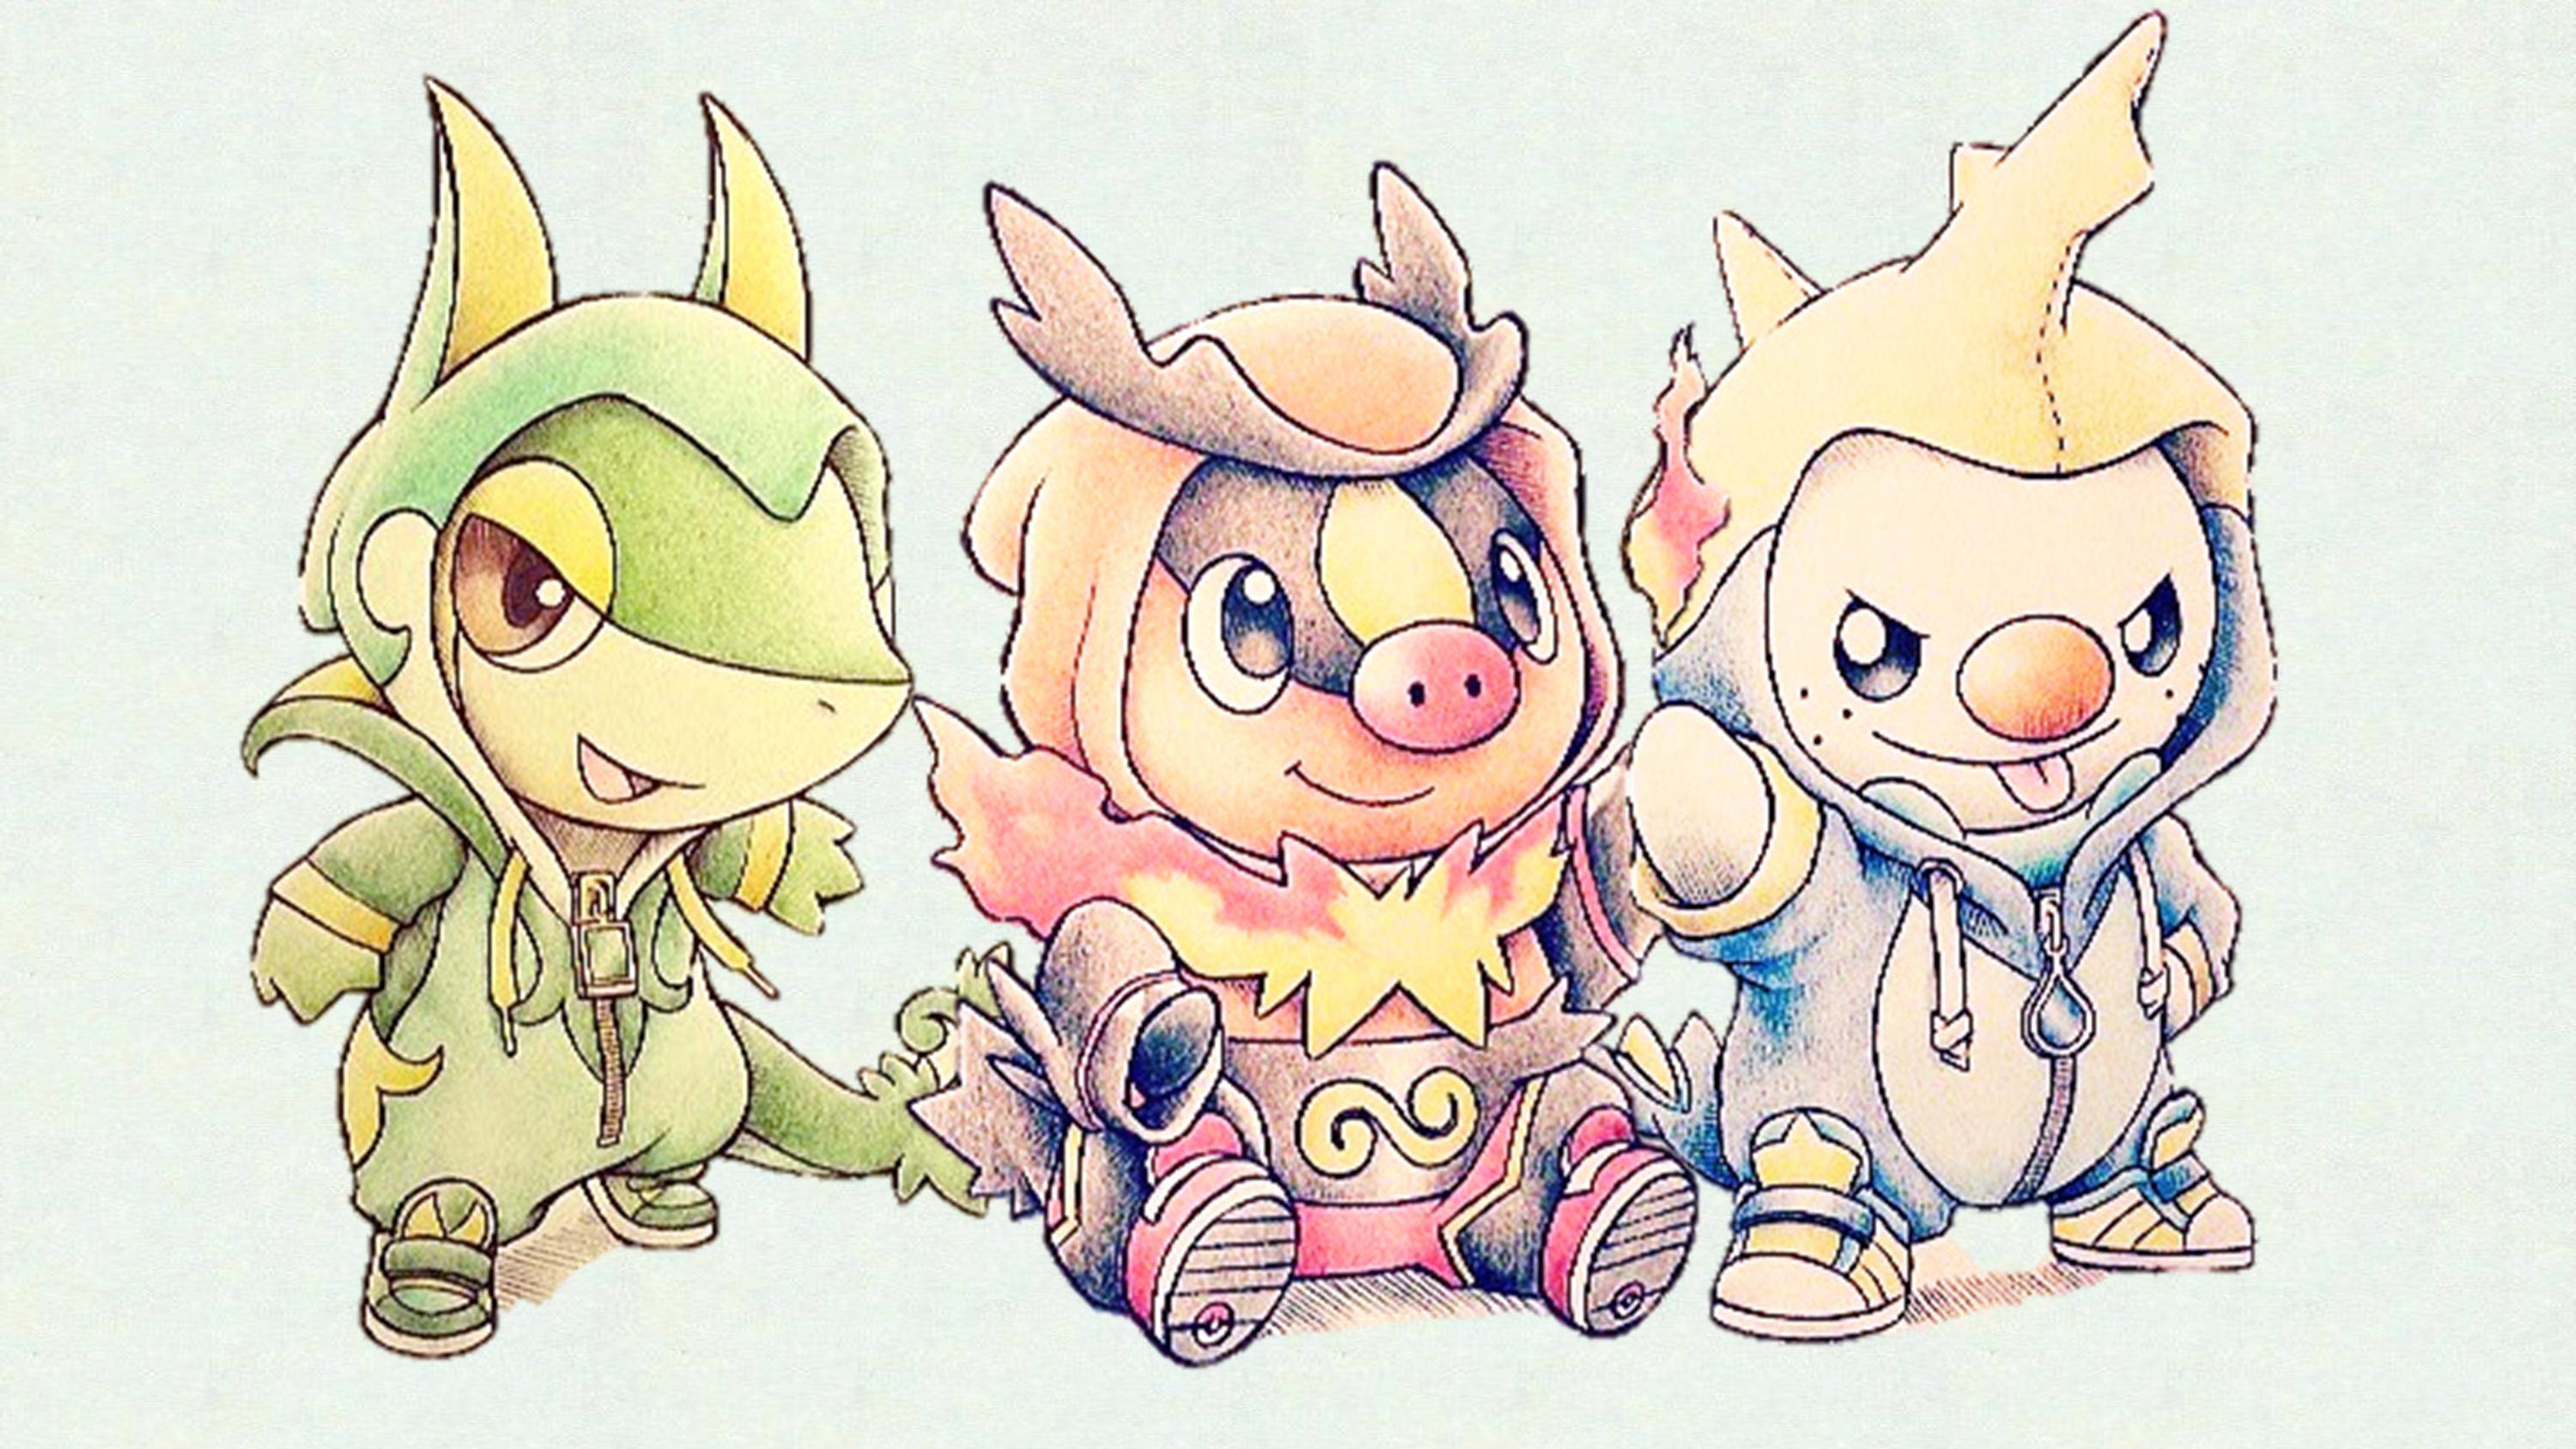 Since the new Pokemon game is out tomorrow, here are some cute